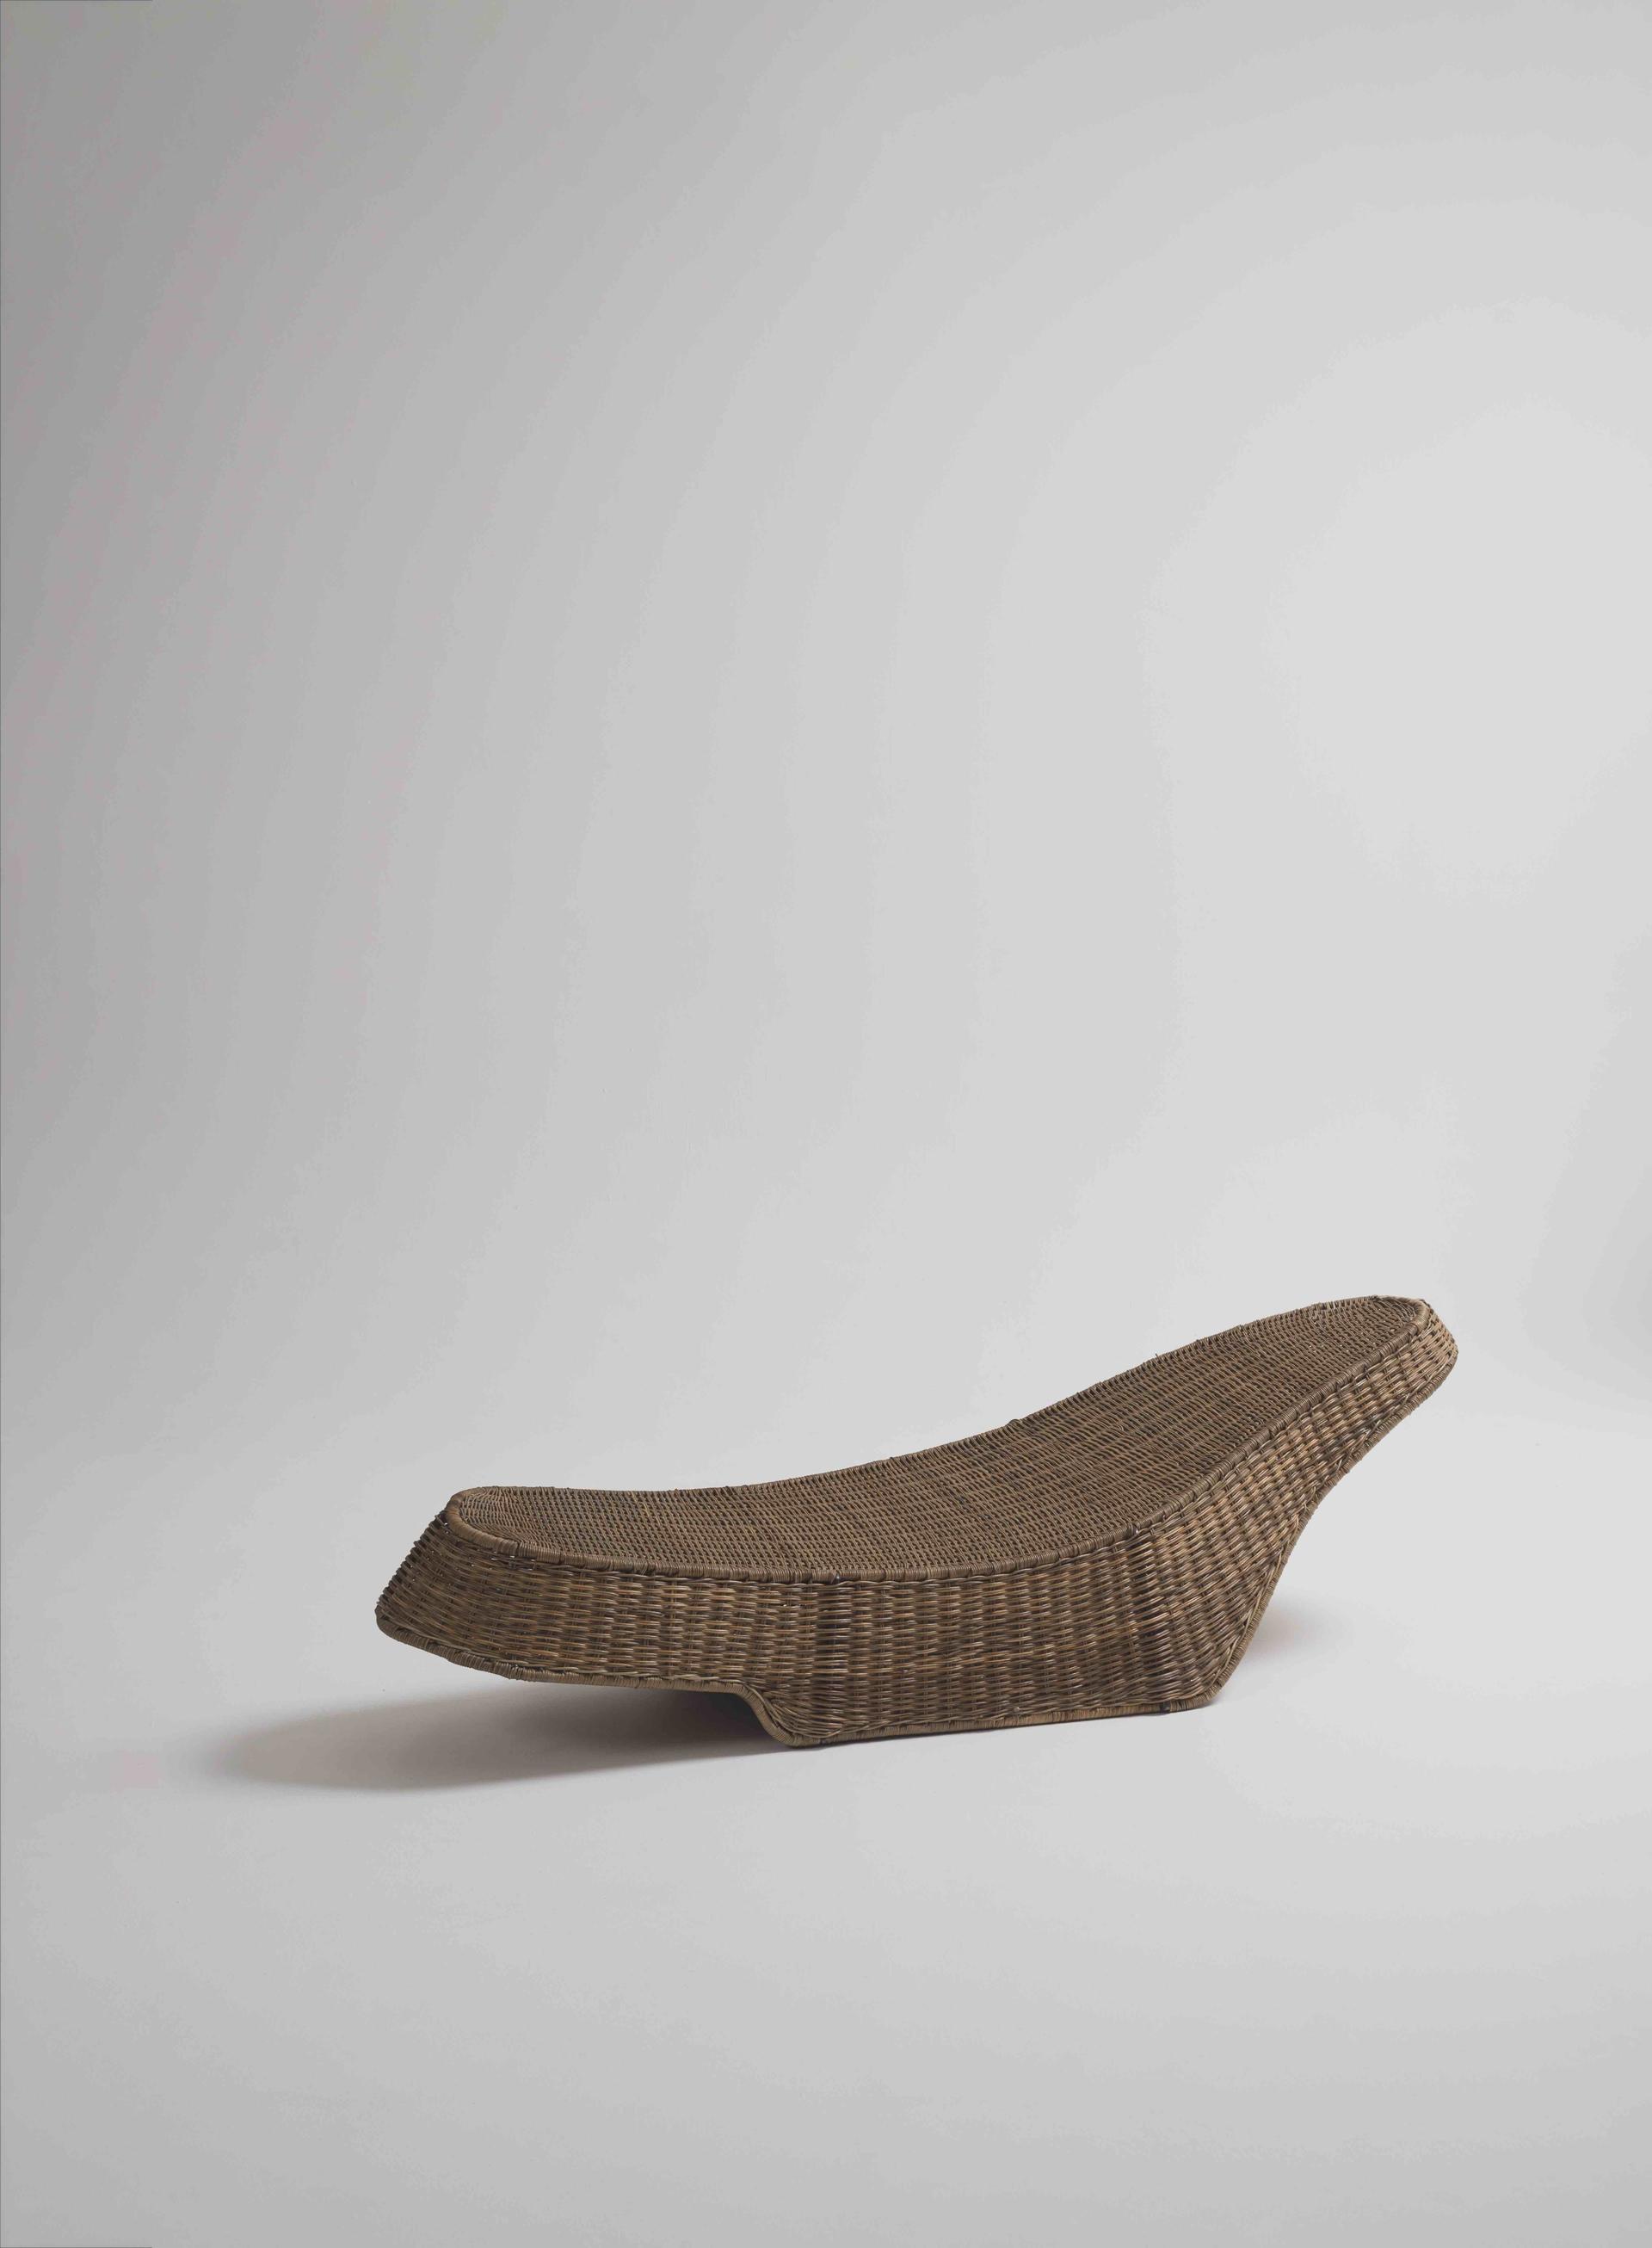 Chaise Lounge weaved metal frame with wicker by Manuel Otzoy in Guatemala